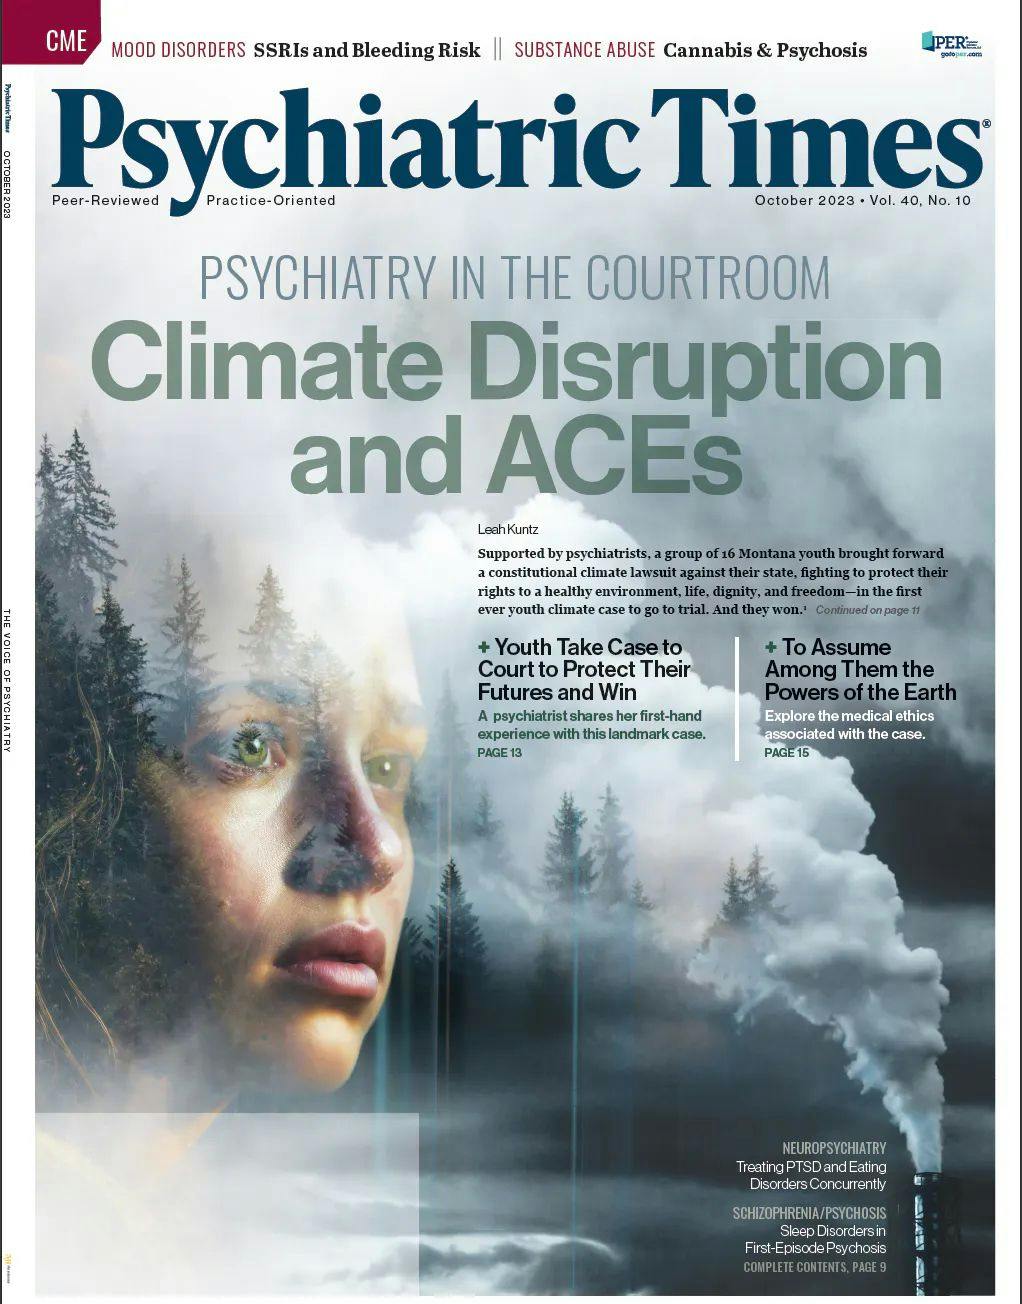 The experts weighed in on a wide variety of psychiatric issues for the October 2023 issue of Psychiatric Times.